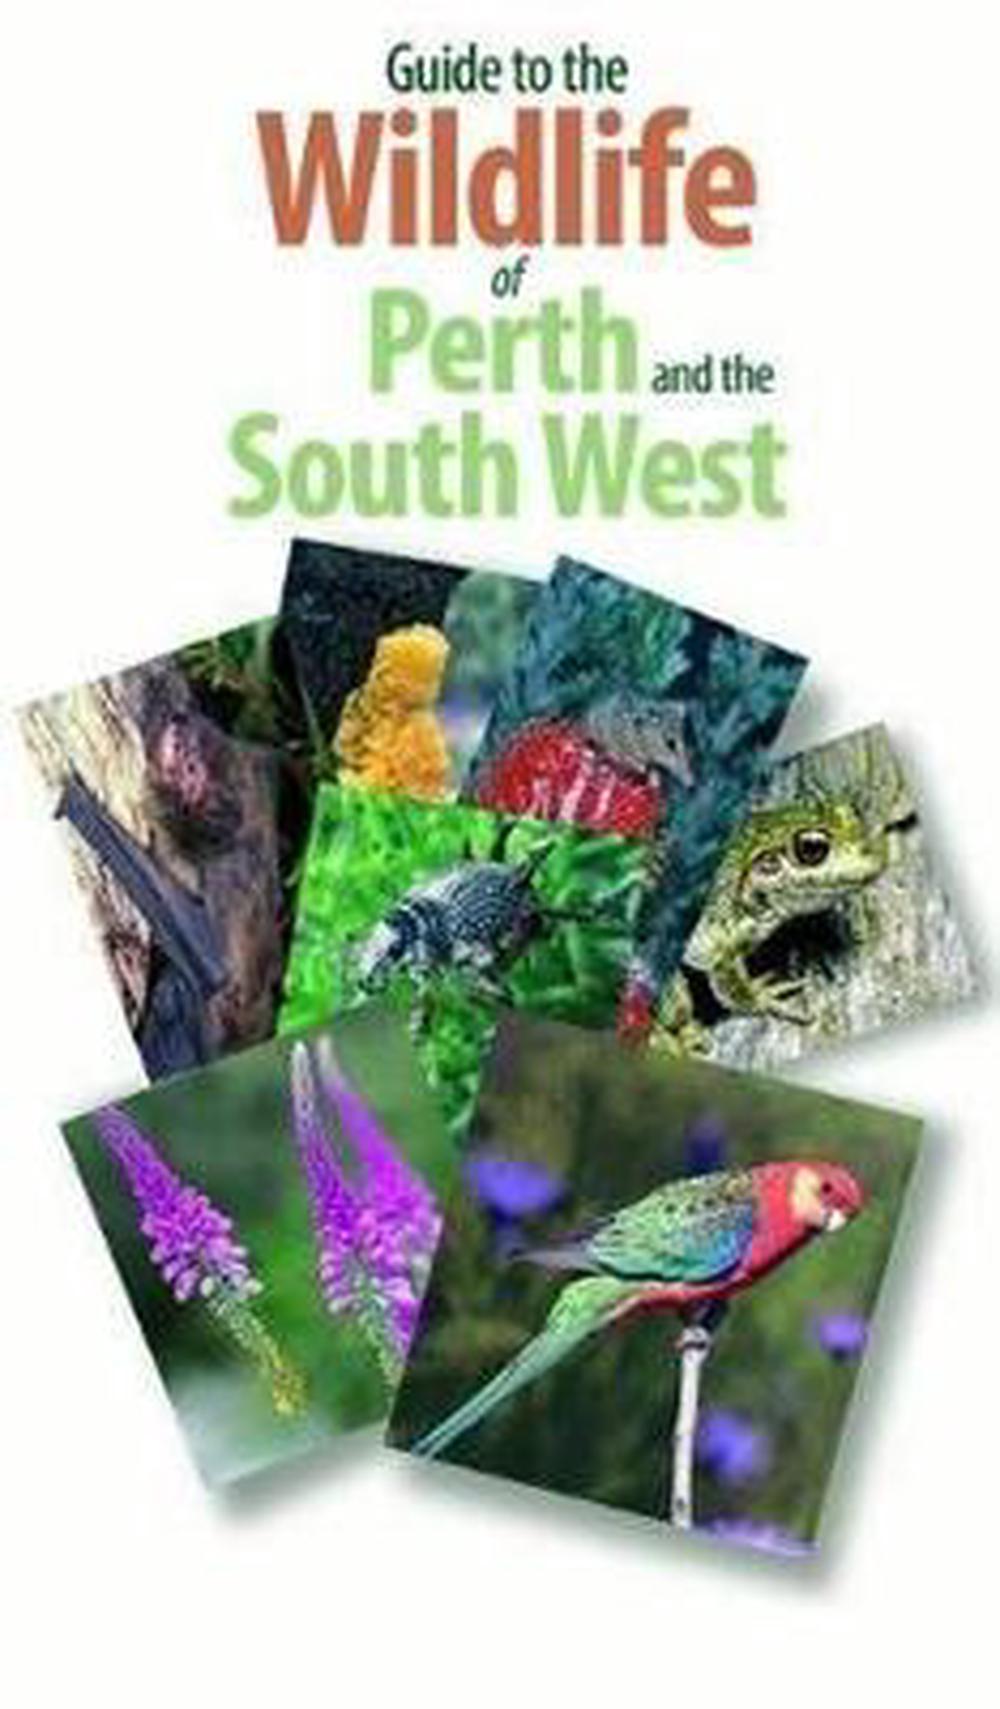 Guide to the Wildlife of Perth and Australia's South West